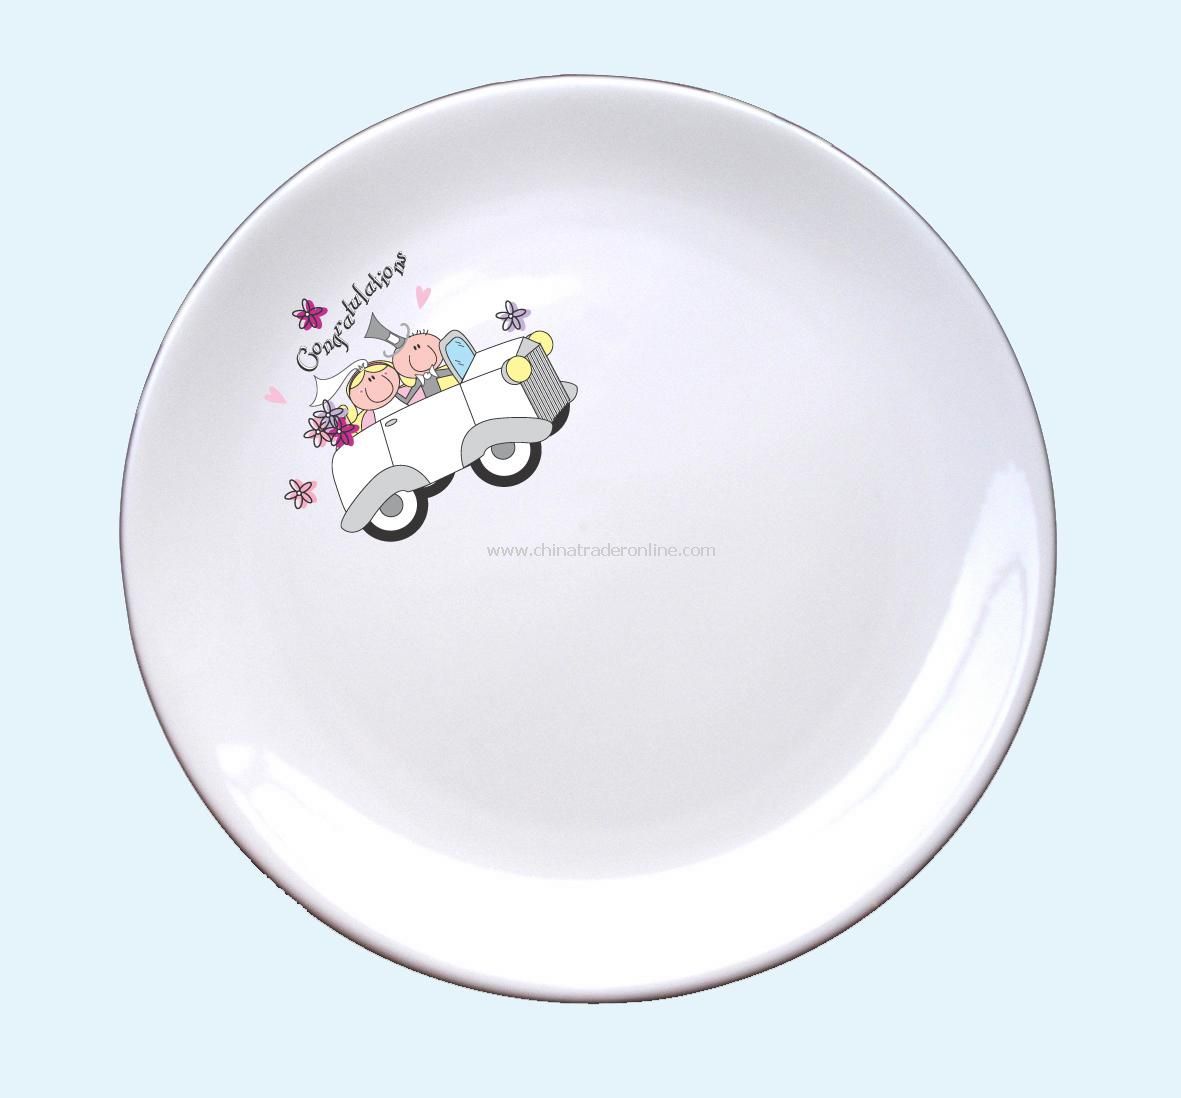 Signature Plate from China